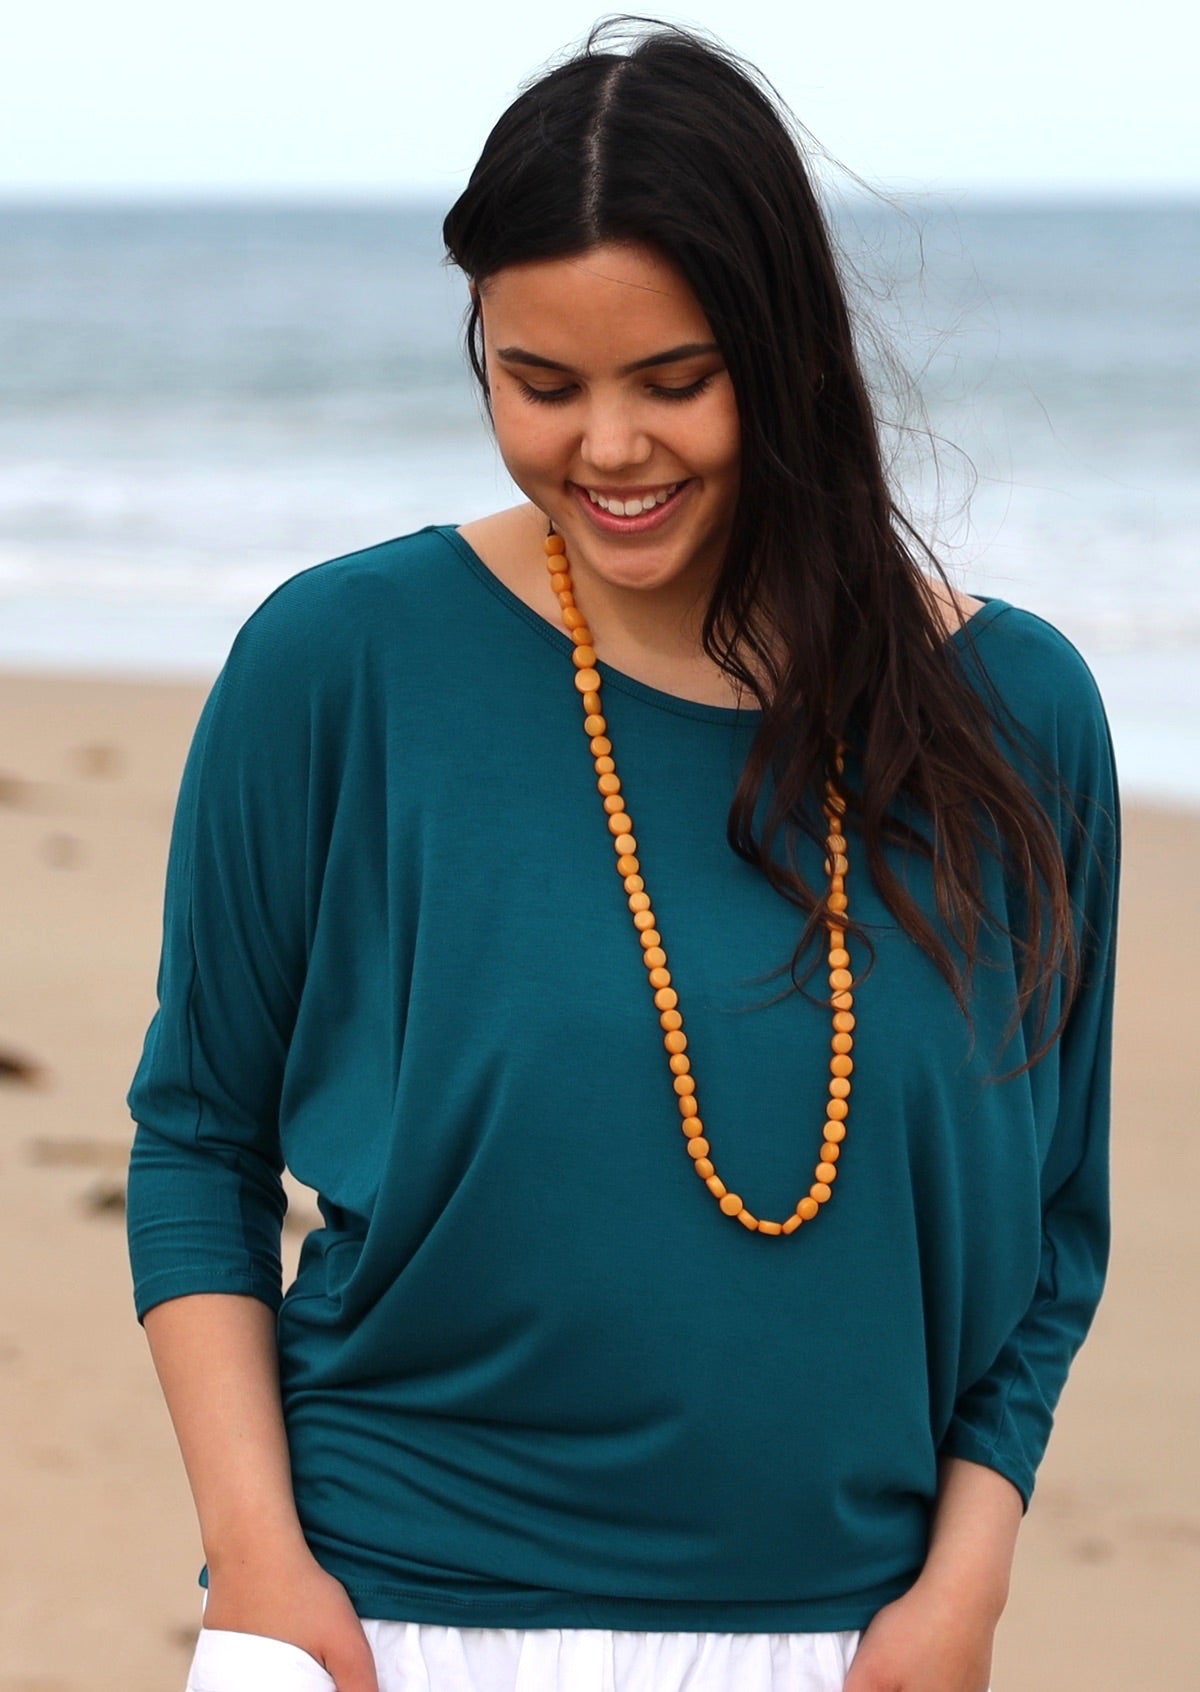 Woman with dark hair looking down wearing a 3/4 sleeve rayon batwing round neckline teal top.